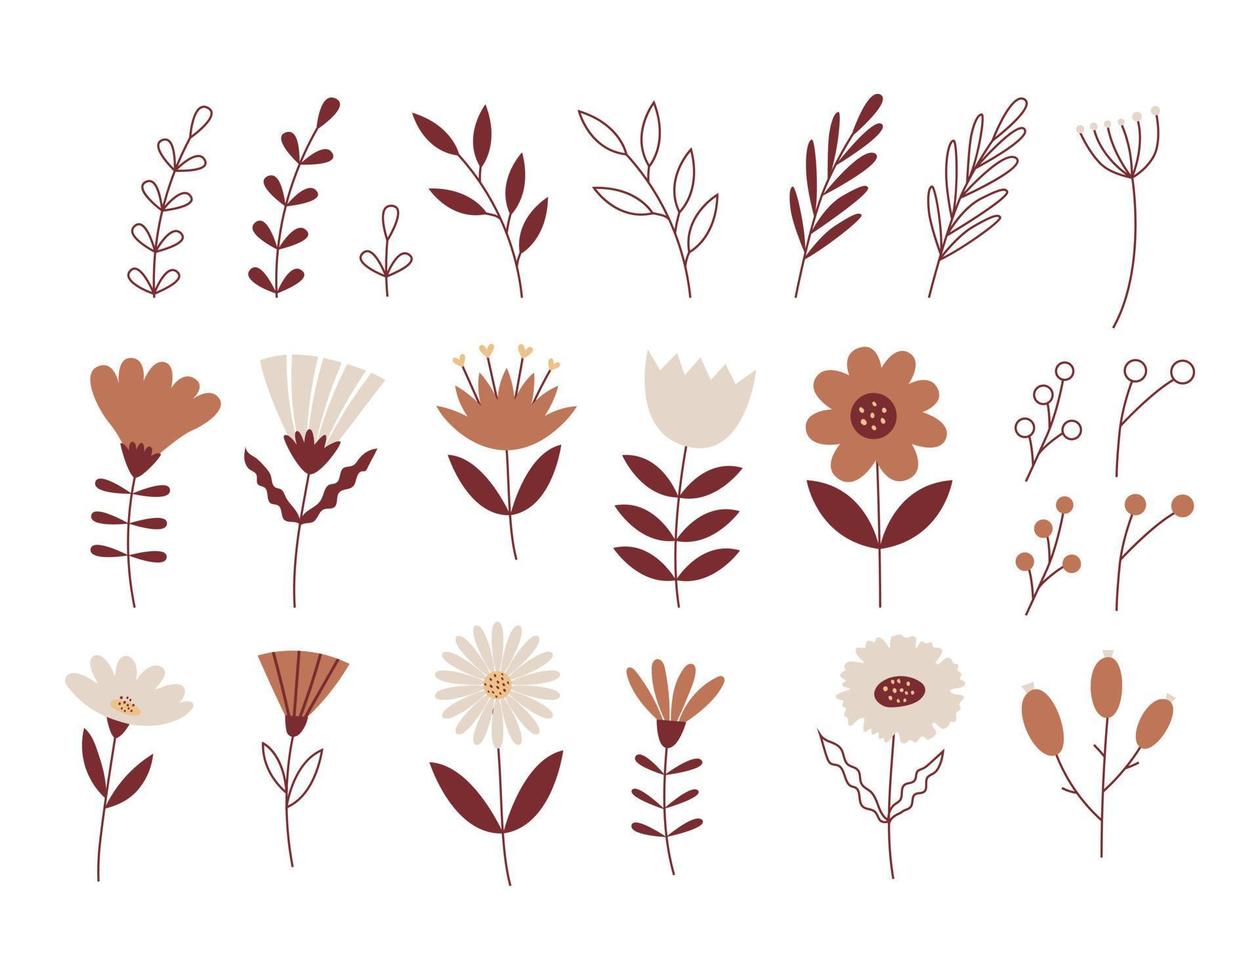 A set of simple flowers, twigs, leaves. Neutral beige colors. Botanical vector illustrations isolated on a white background.